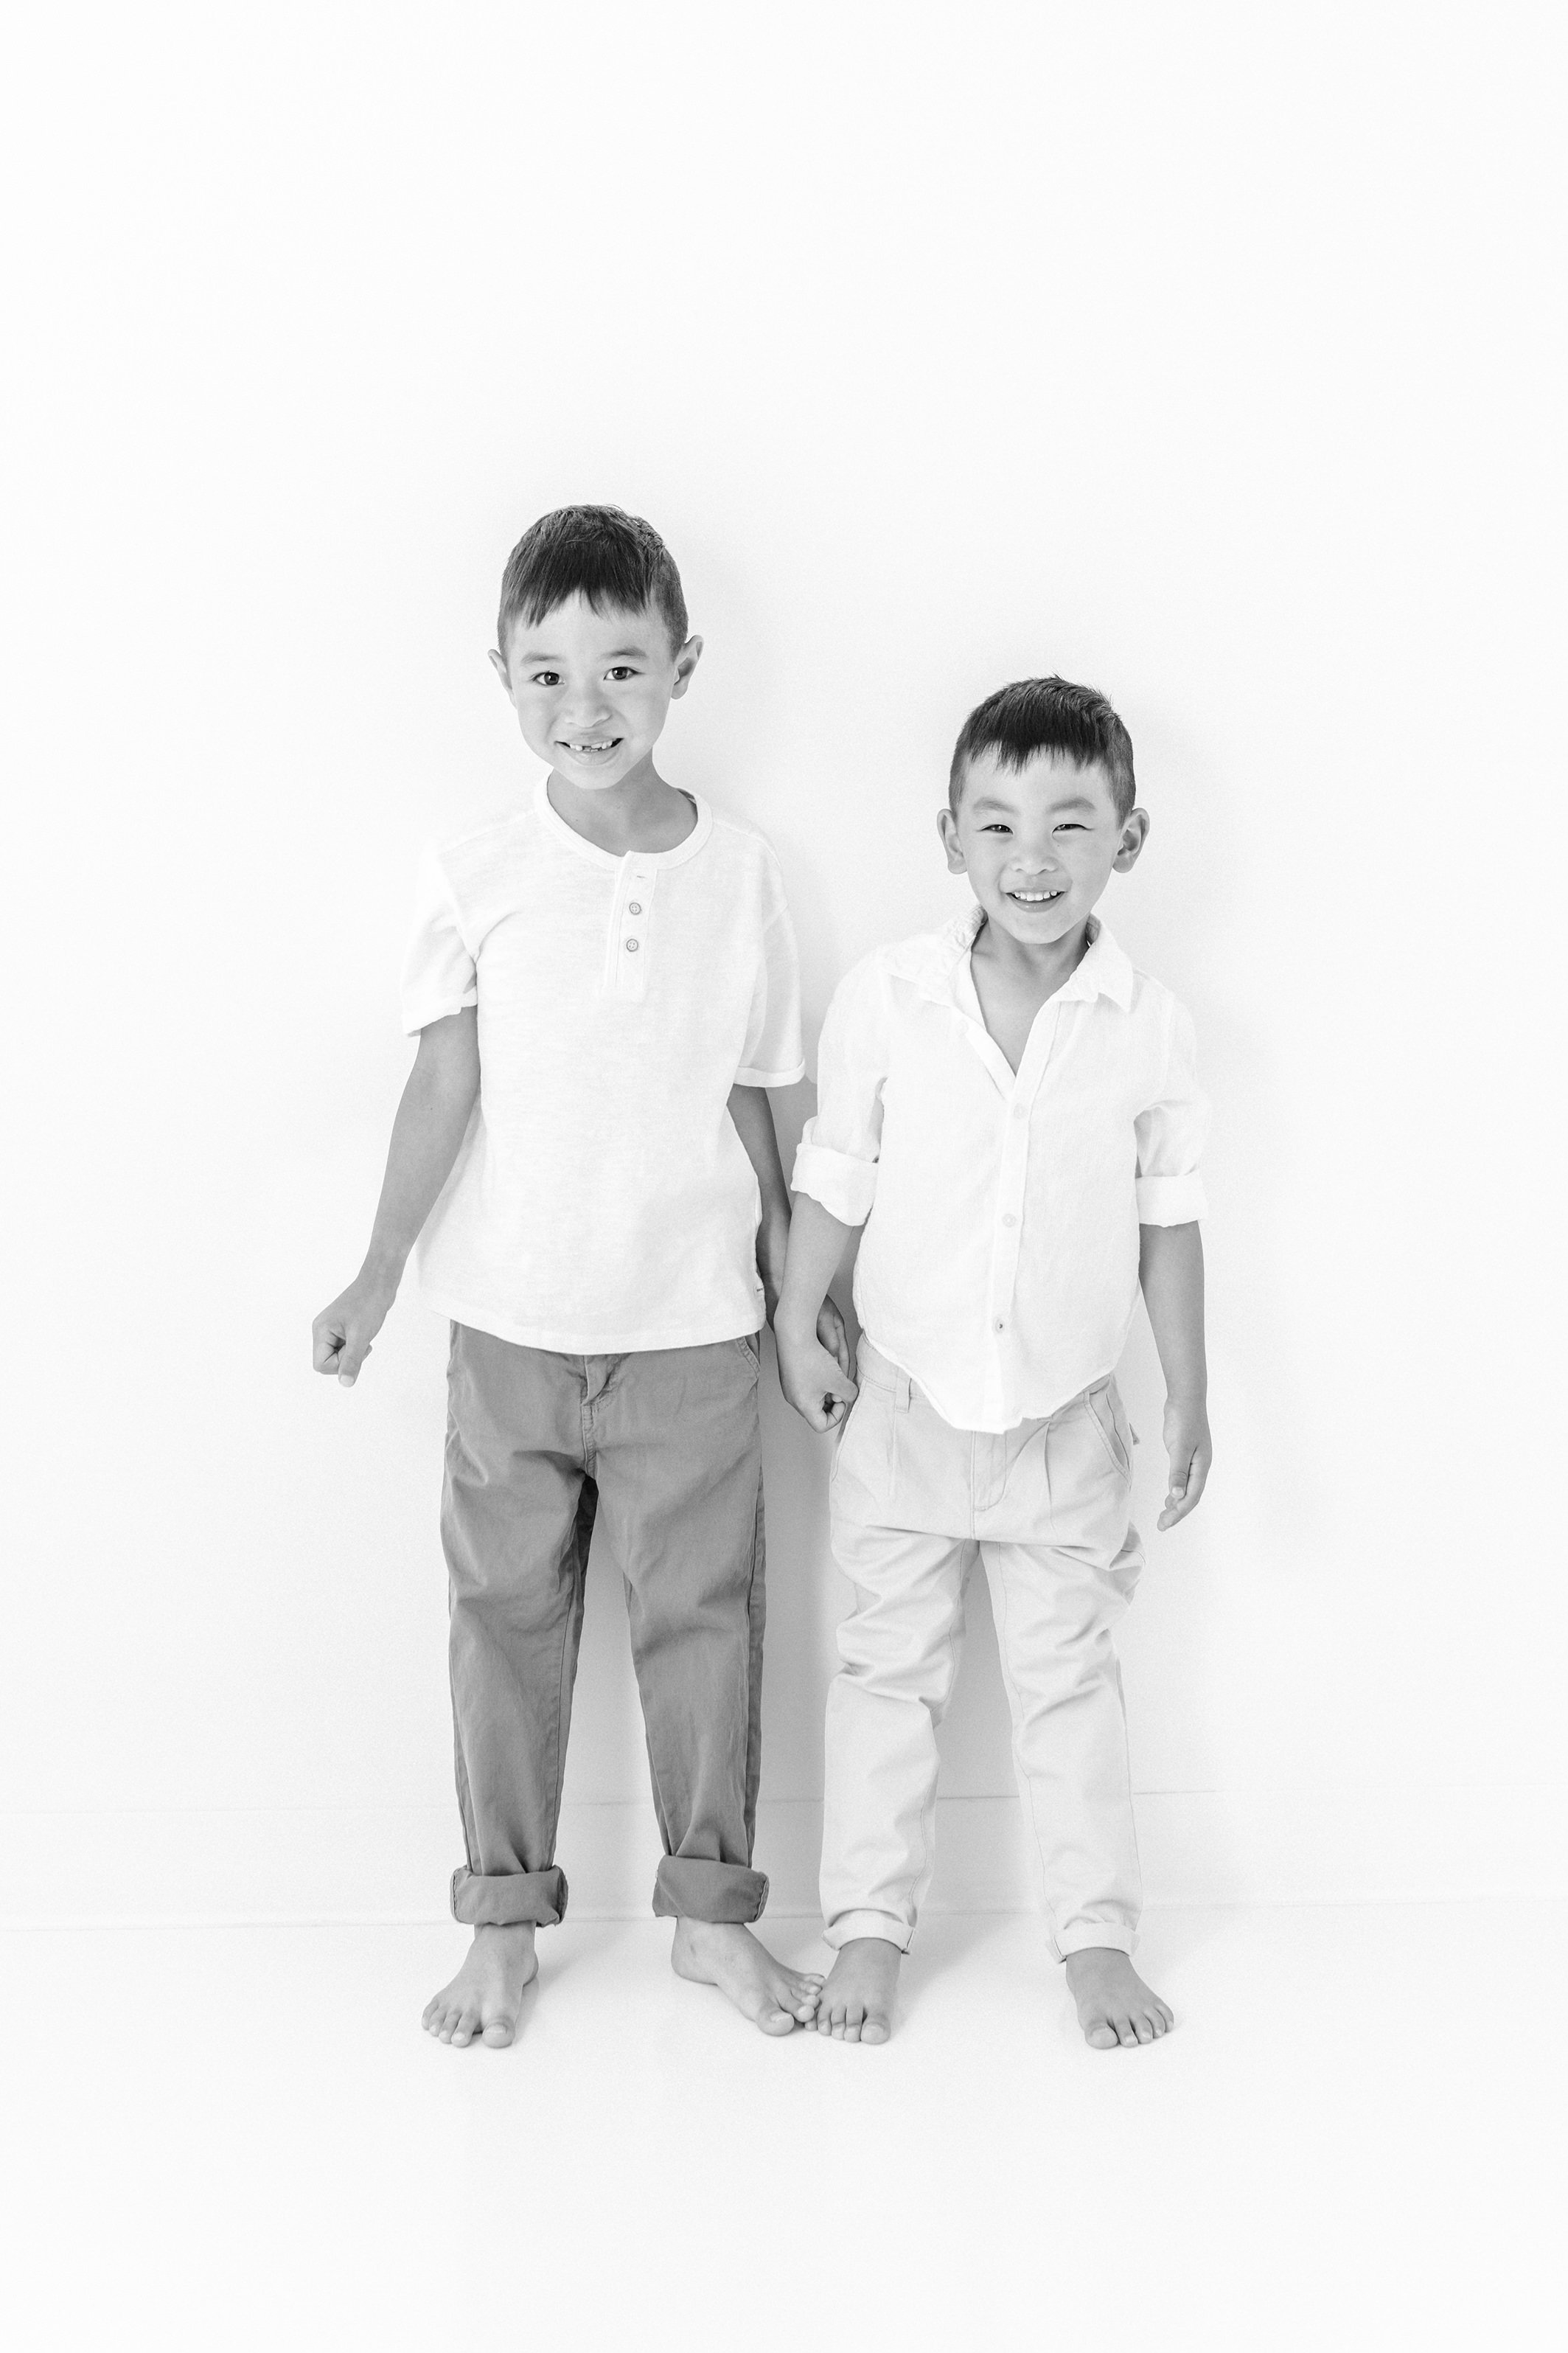    Two brothers shown in black and white studio portrait at a newborn family photo session in New Jersey. Pictures captured by Nicole Hawkins Photography. Brothers are both smiling wide at the camera while holding hands #studionewborns #studioportrai